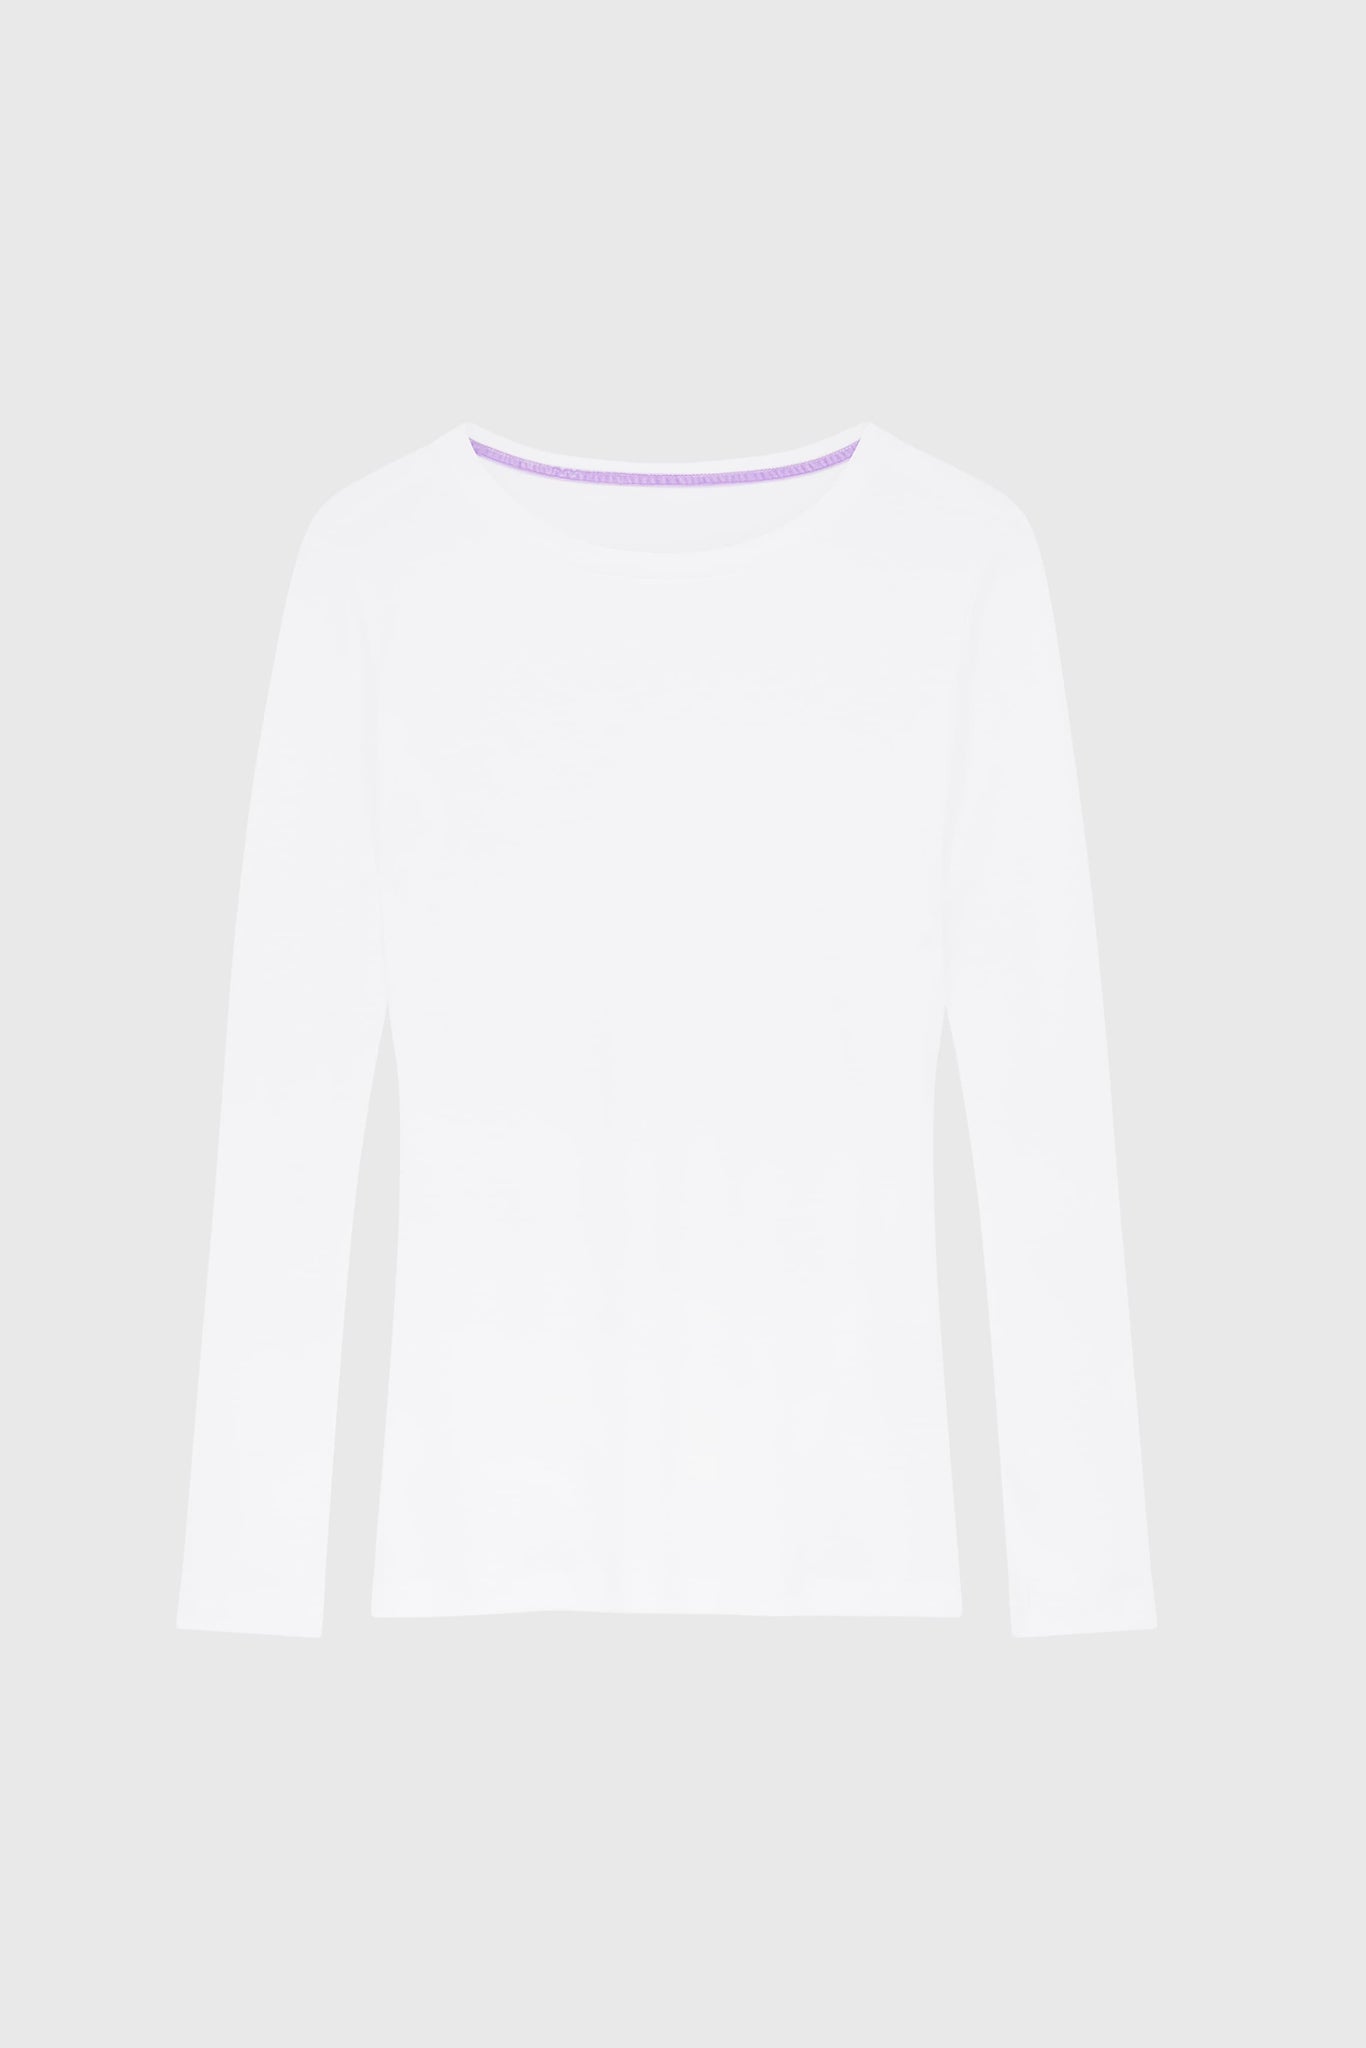 Quality Women's White Long Sleeve Crew Neck Cotton Modal Blend t-shirt in White by Lavender Hill Clothing 